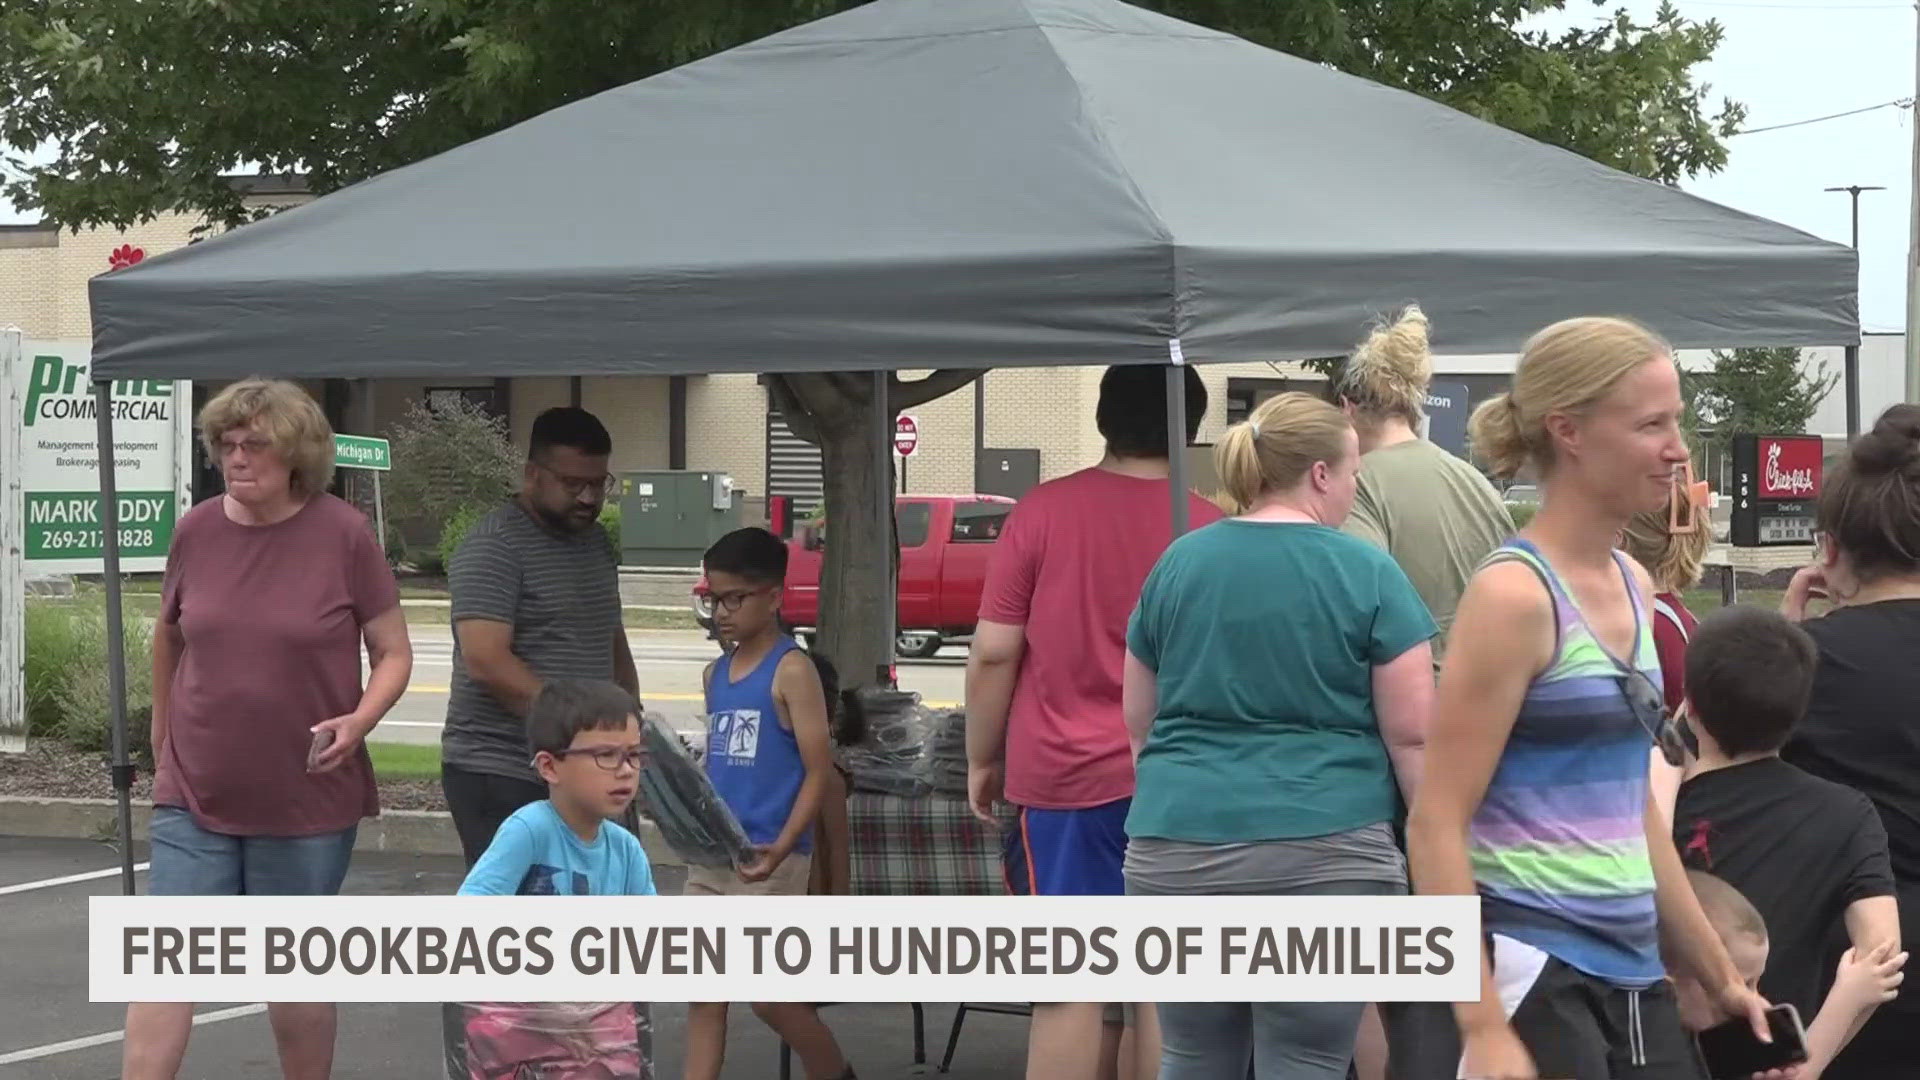 The 13th annual School Rocks Backpack Giveaway was held on Sunday.